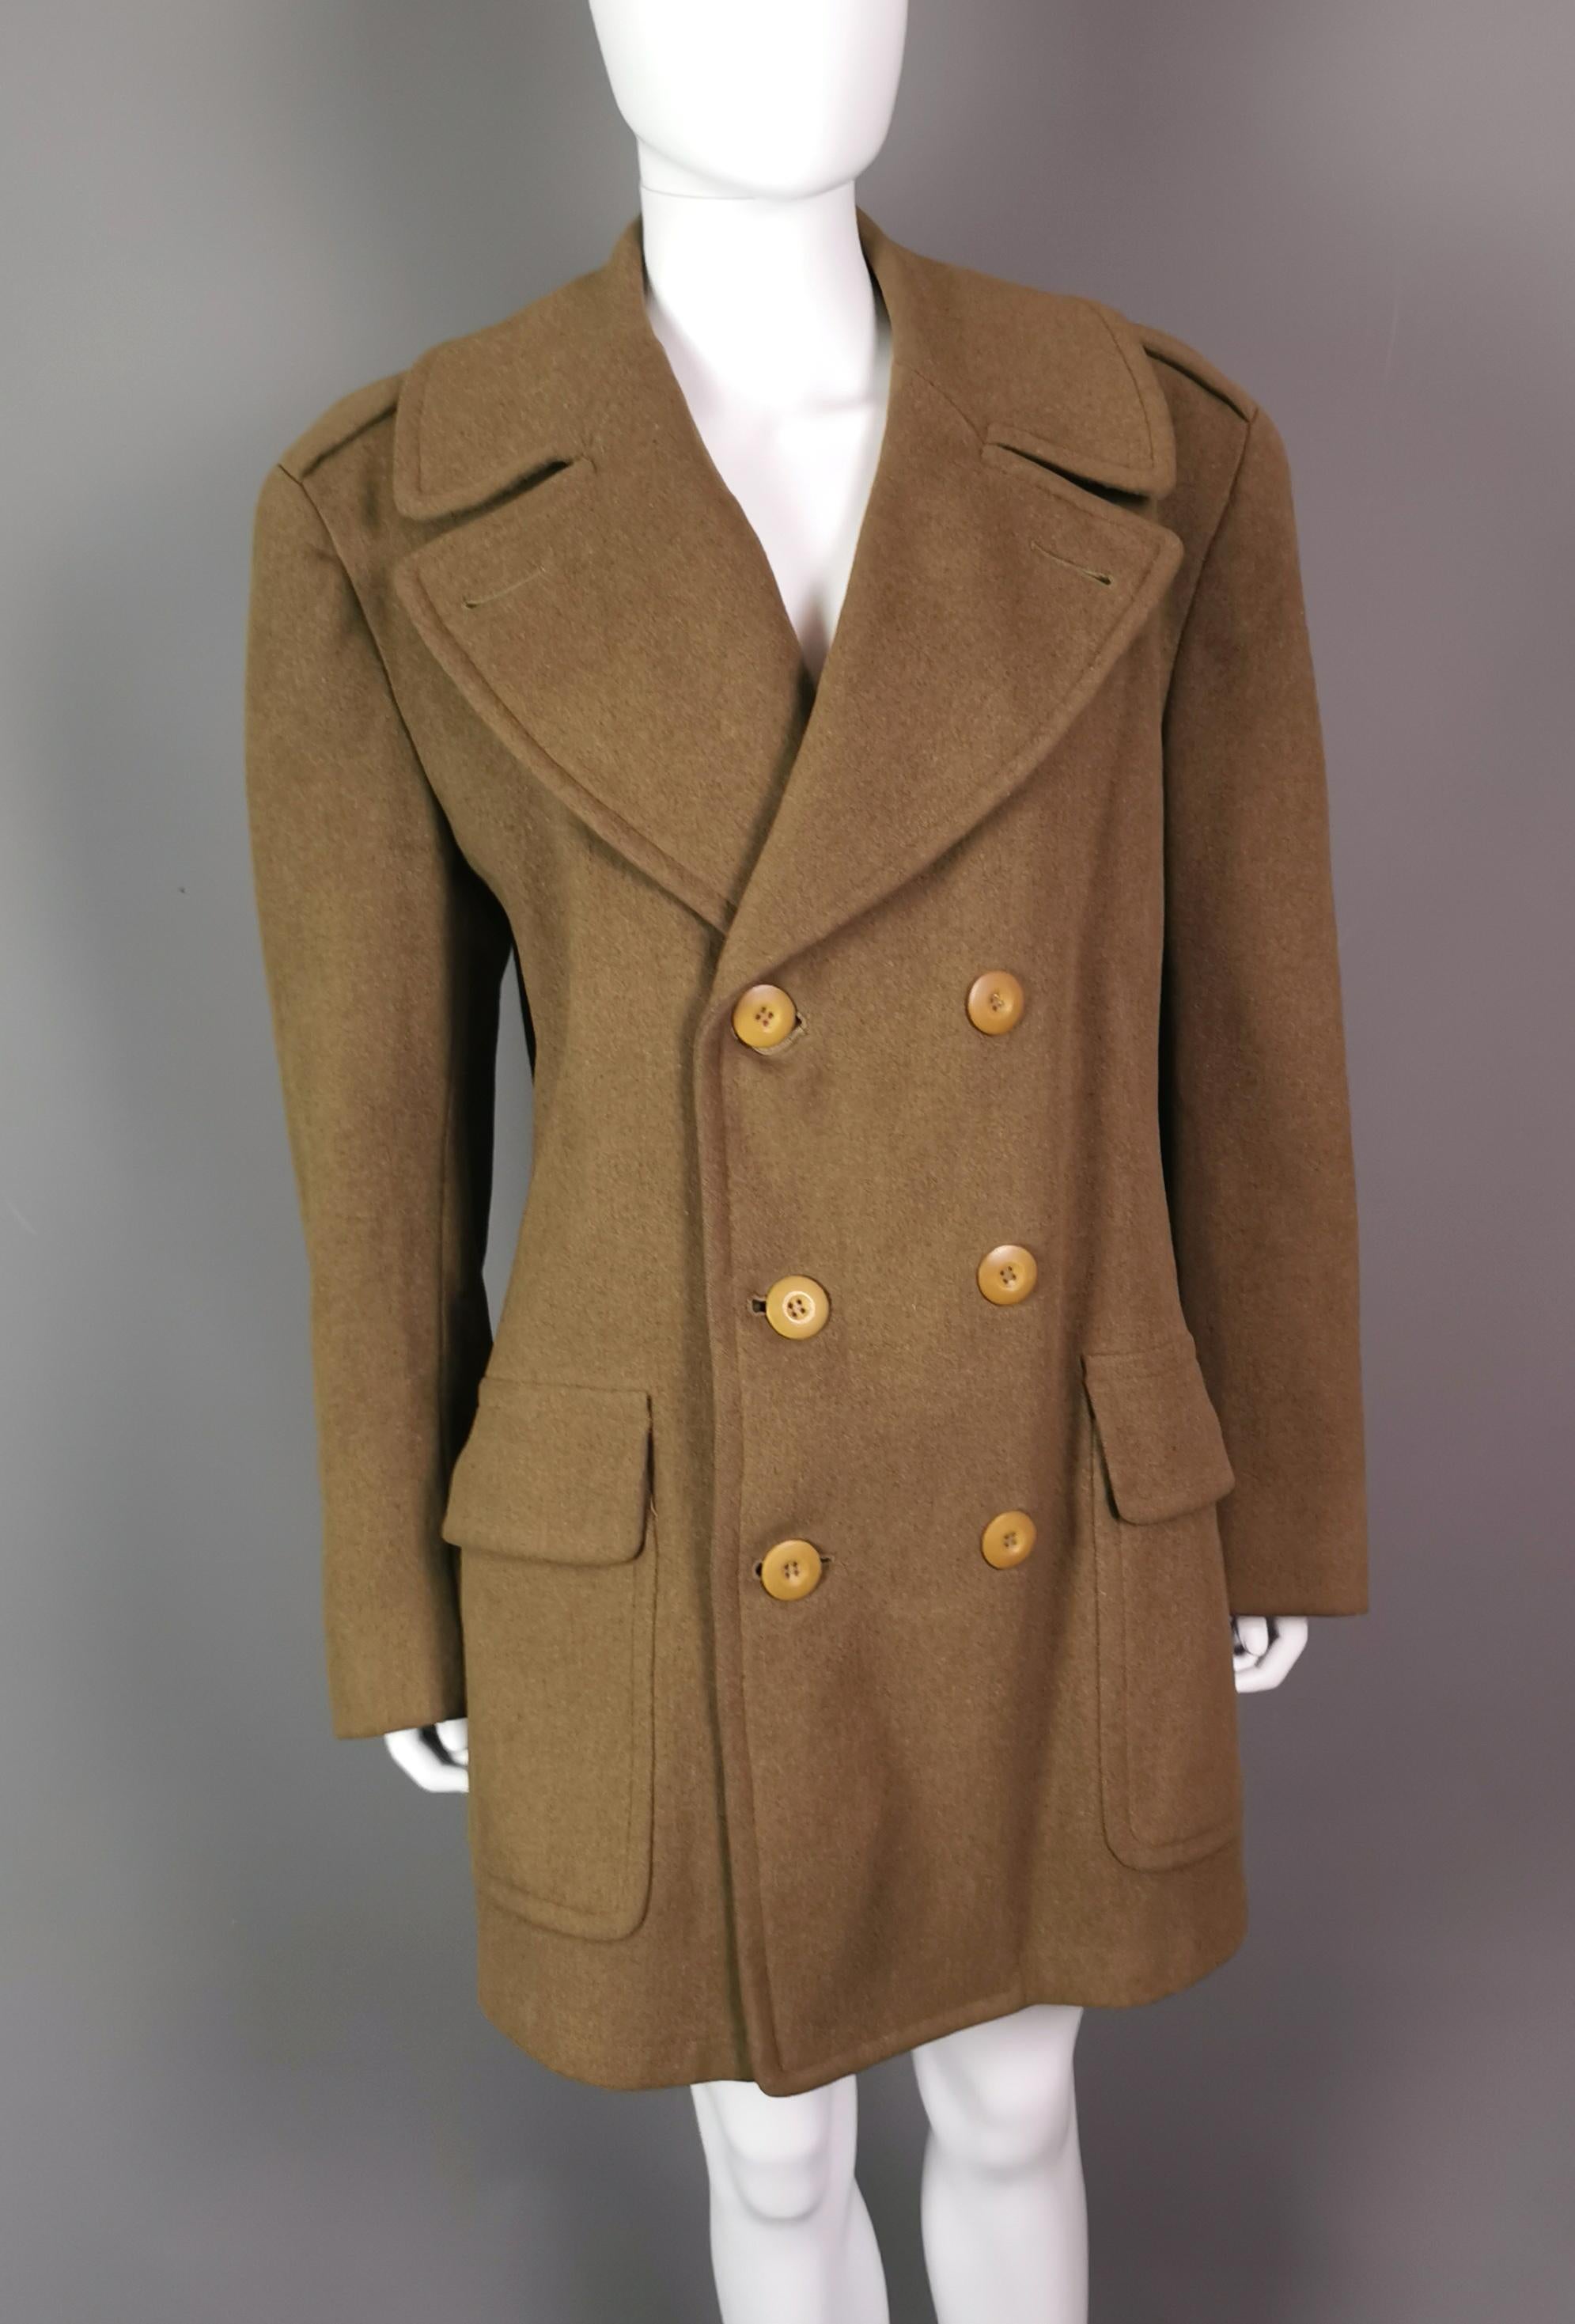 A fabulous vintage 1940's British Army officer's overcoat.

Khaki Green, land officer, Regulation overcoat, with label, it has deep mustard coloured bakelite type buttons, internal pockets and is a double breasted coat.

It is cut very thick and